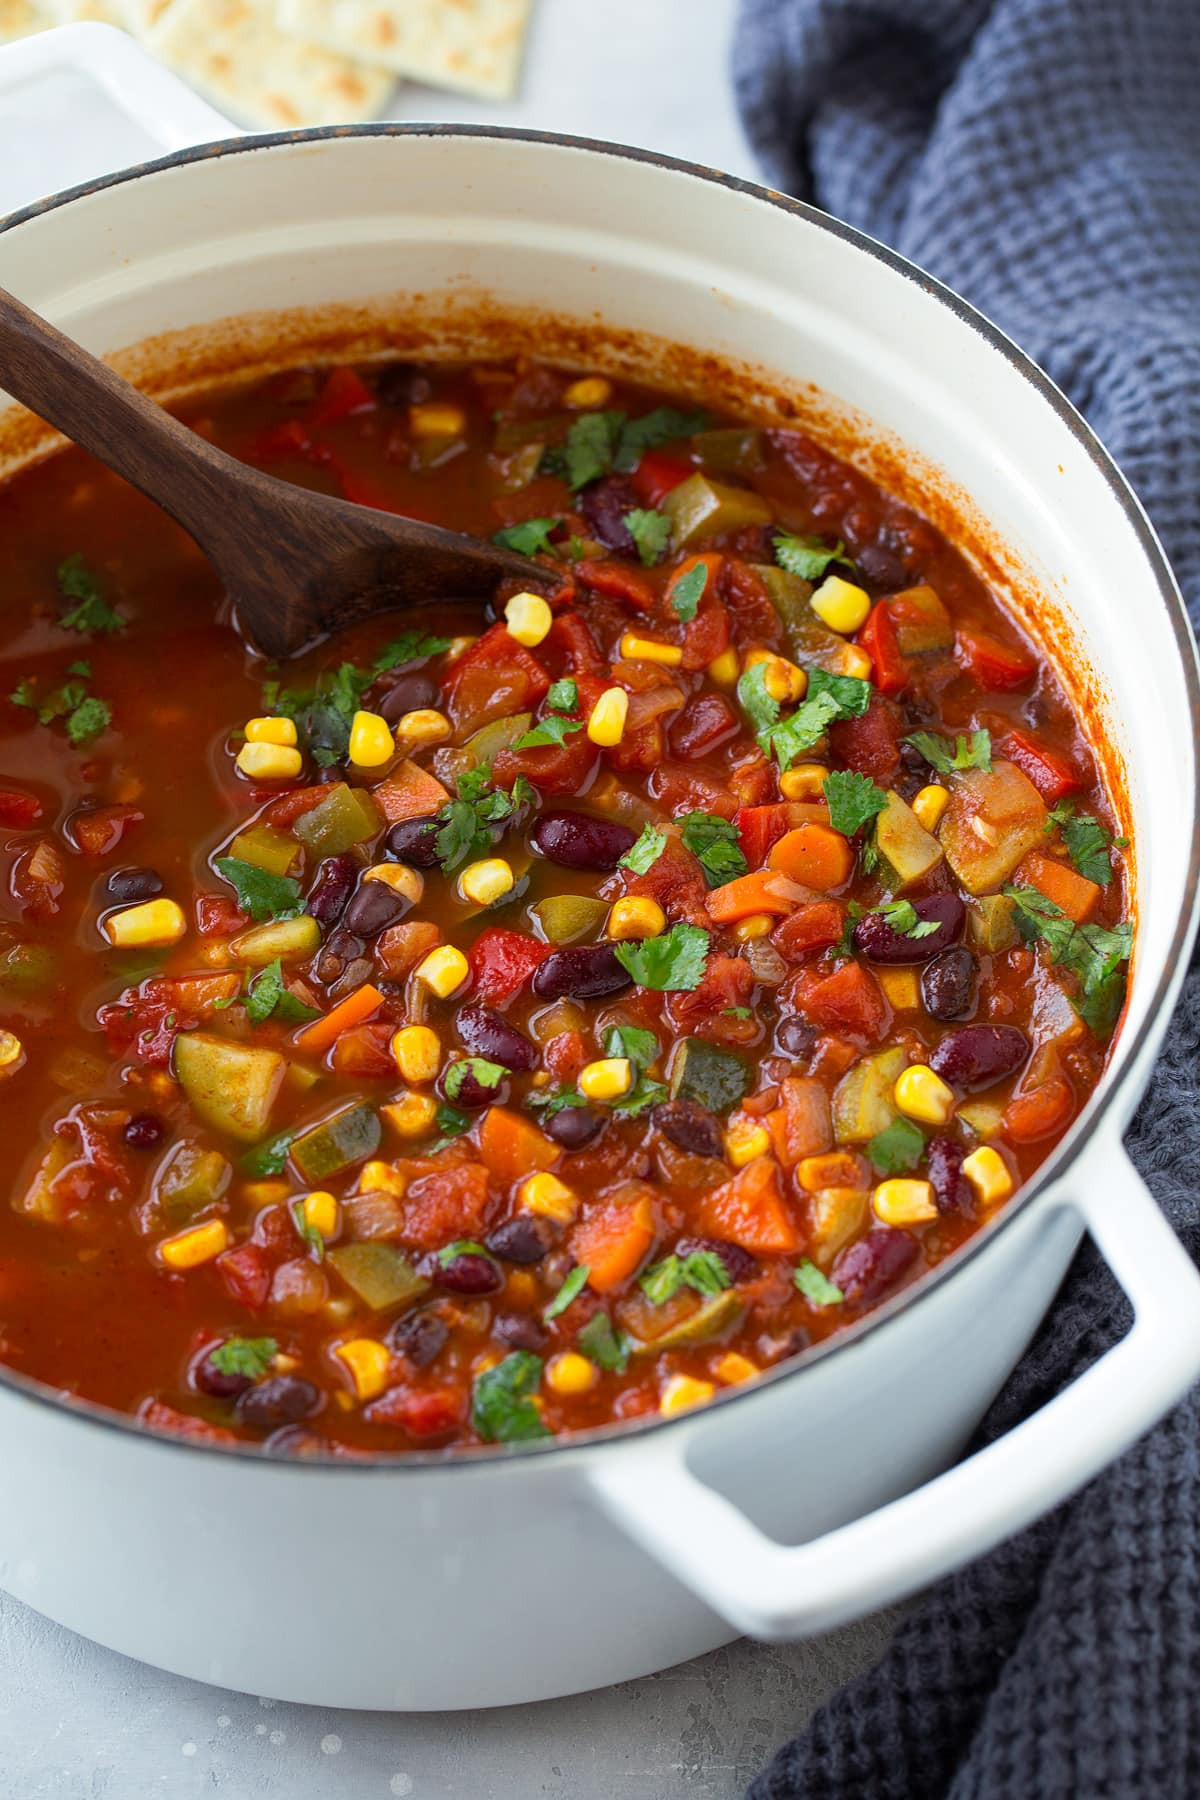 Taste Of Home Vegetarian Chili
 Ve arian Chili Healthy and Packed with Flavor